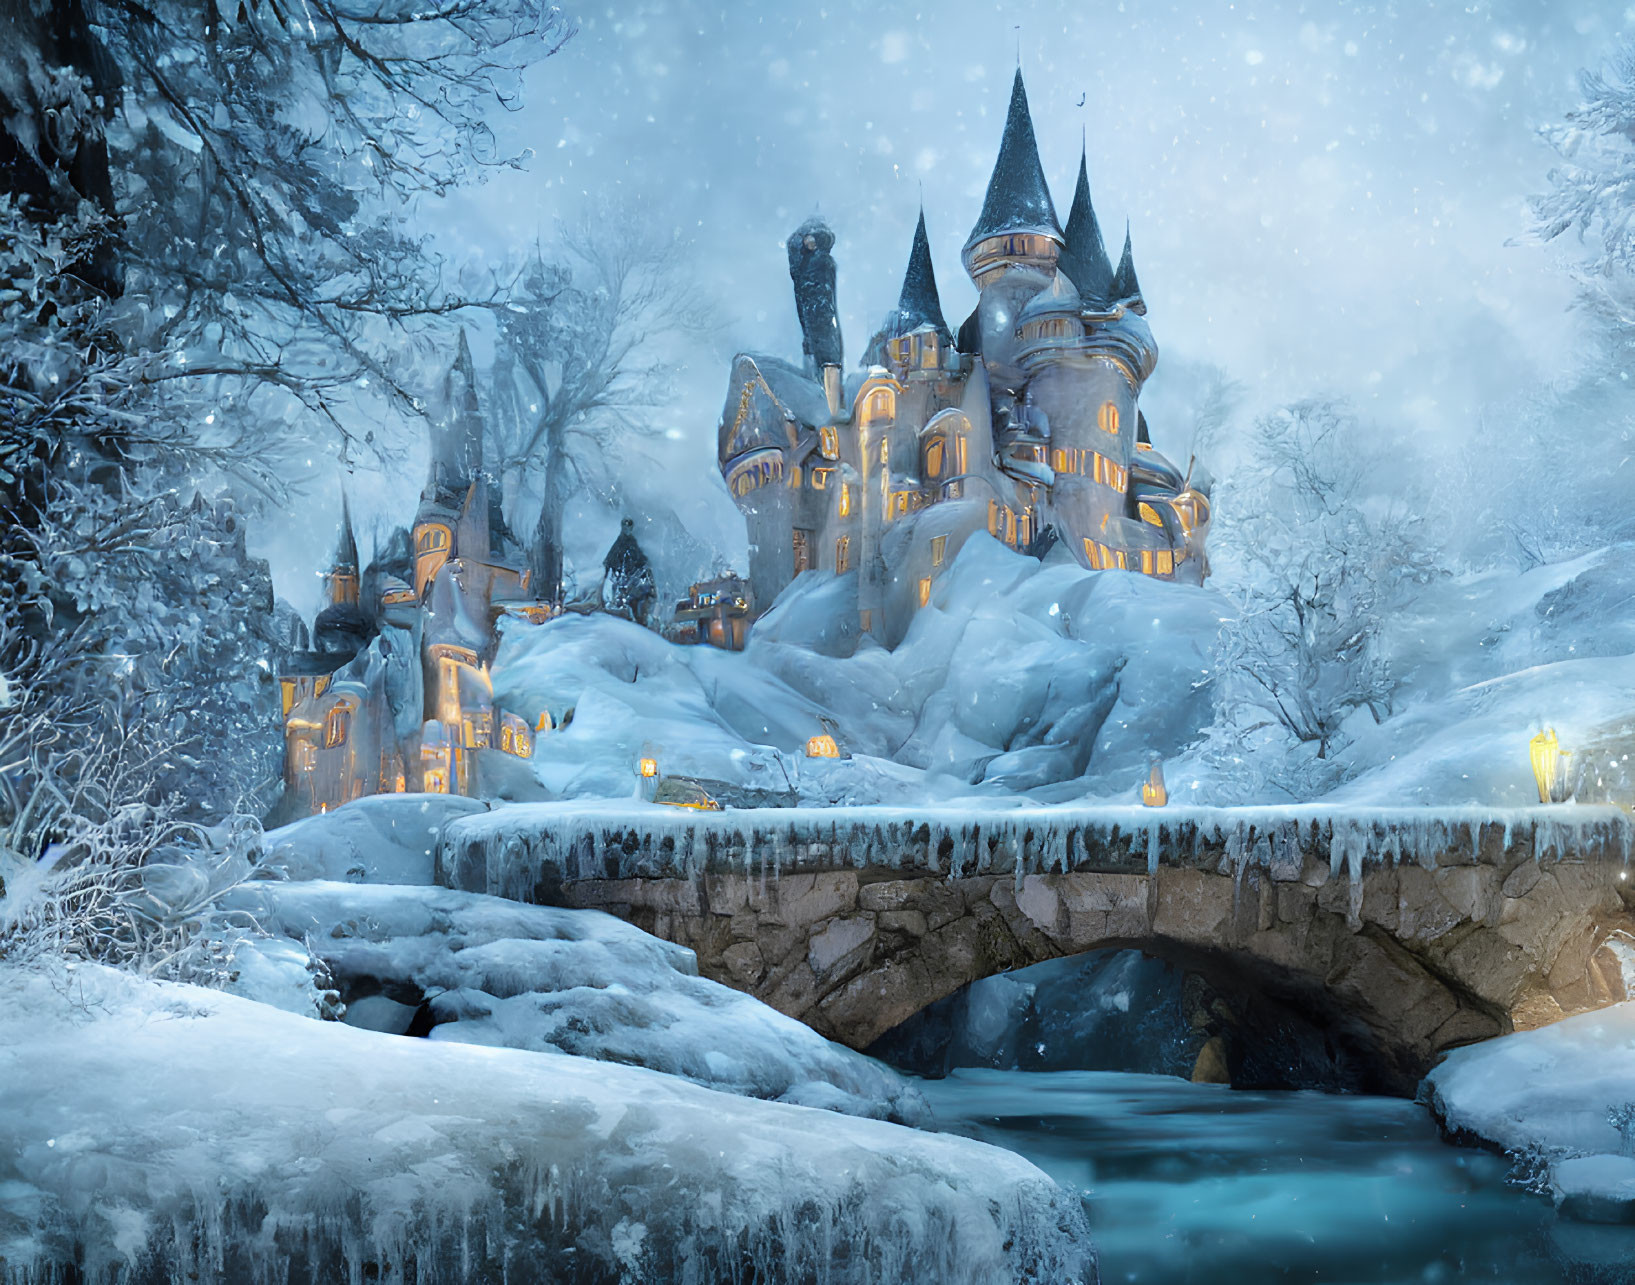 Snow-covered castle with spires, frosty trees, stone bridge, and river.